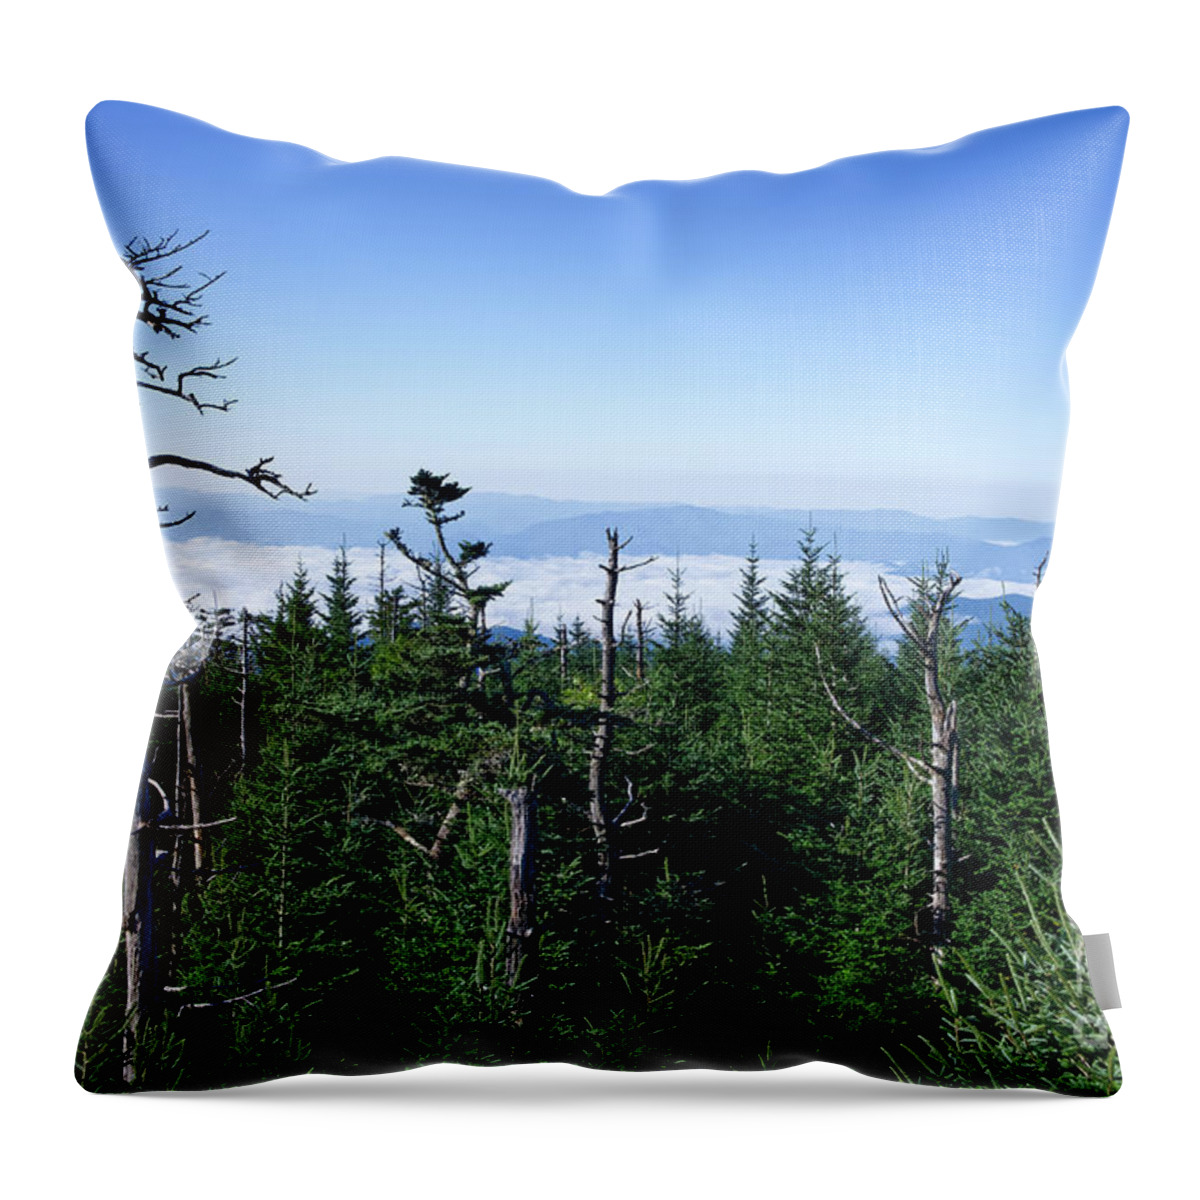 Clingmans Dome Throw Pillow featuring the photograph Clingmans Dome 16 by Phil Perkins